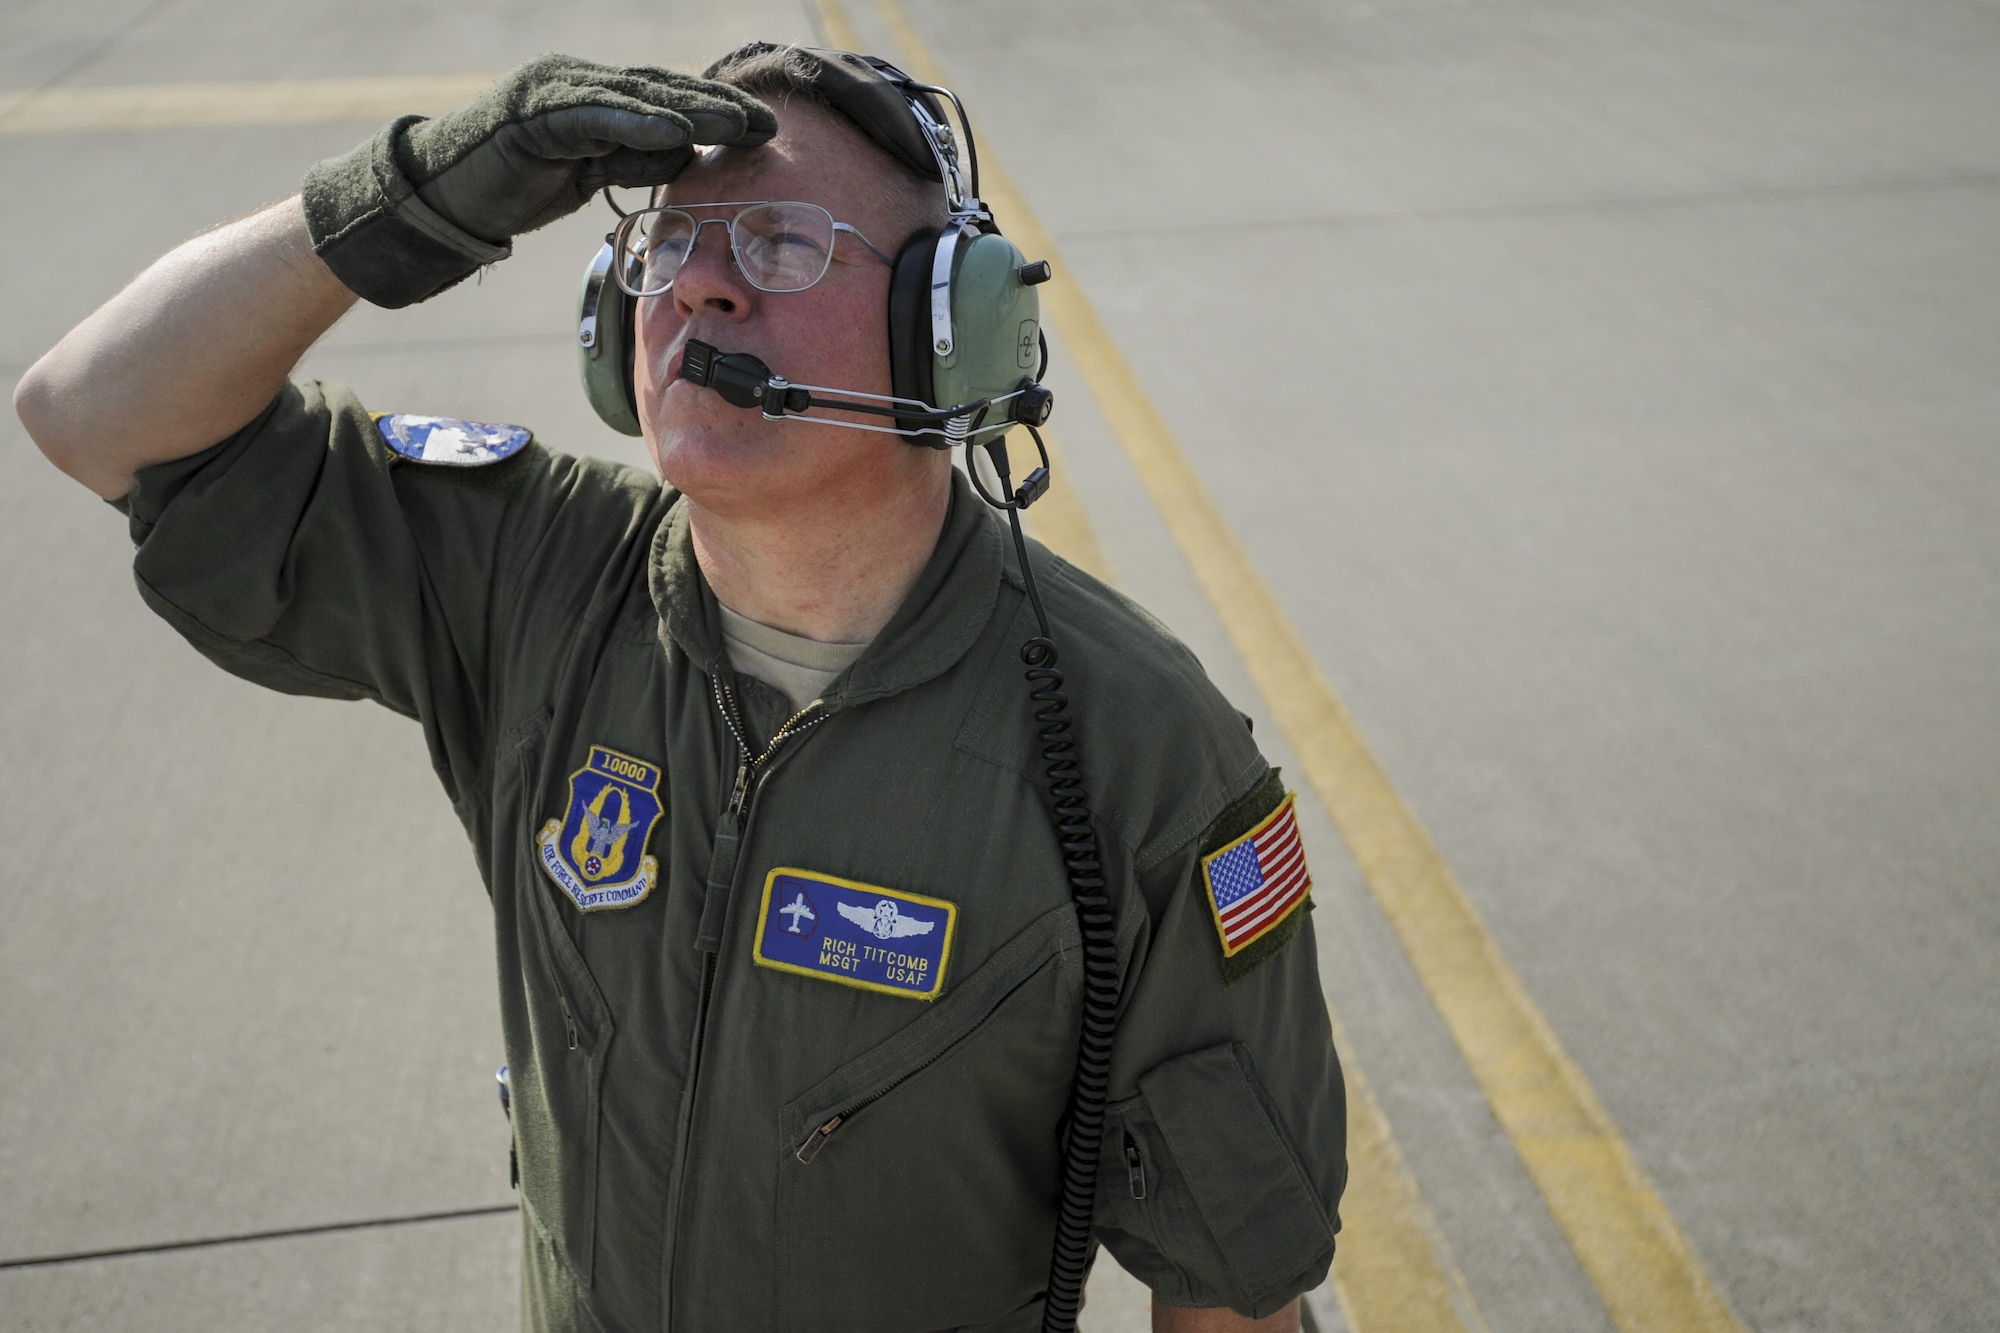 Master Sgt. Richard Titcomb, 339th Flight Test Squadron C-5 flight engineer, performs pre-flight checks to a C-5M Super Galaxy March 29, 2017, at Robins Air Force Base, Ga. The 339th is responsible for conducting flight tests on F-15s, C-130s and C-5s once programmed depot maintenance is completed. (U.S. Air Force photo by Jamal D. Sutter)